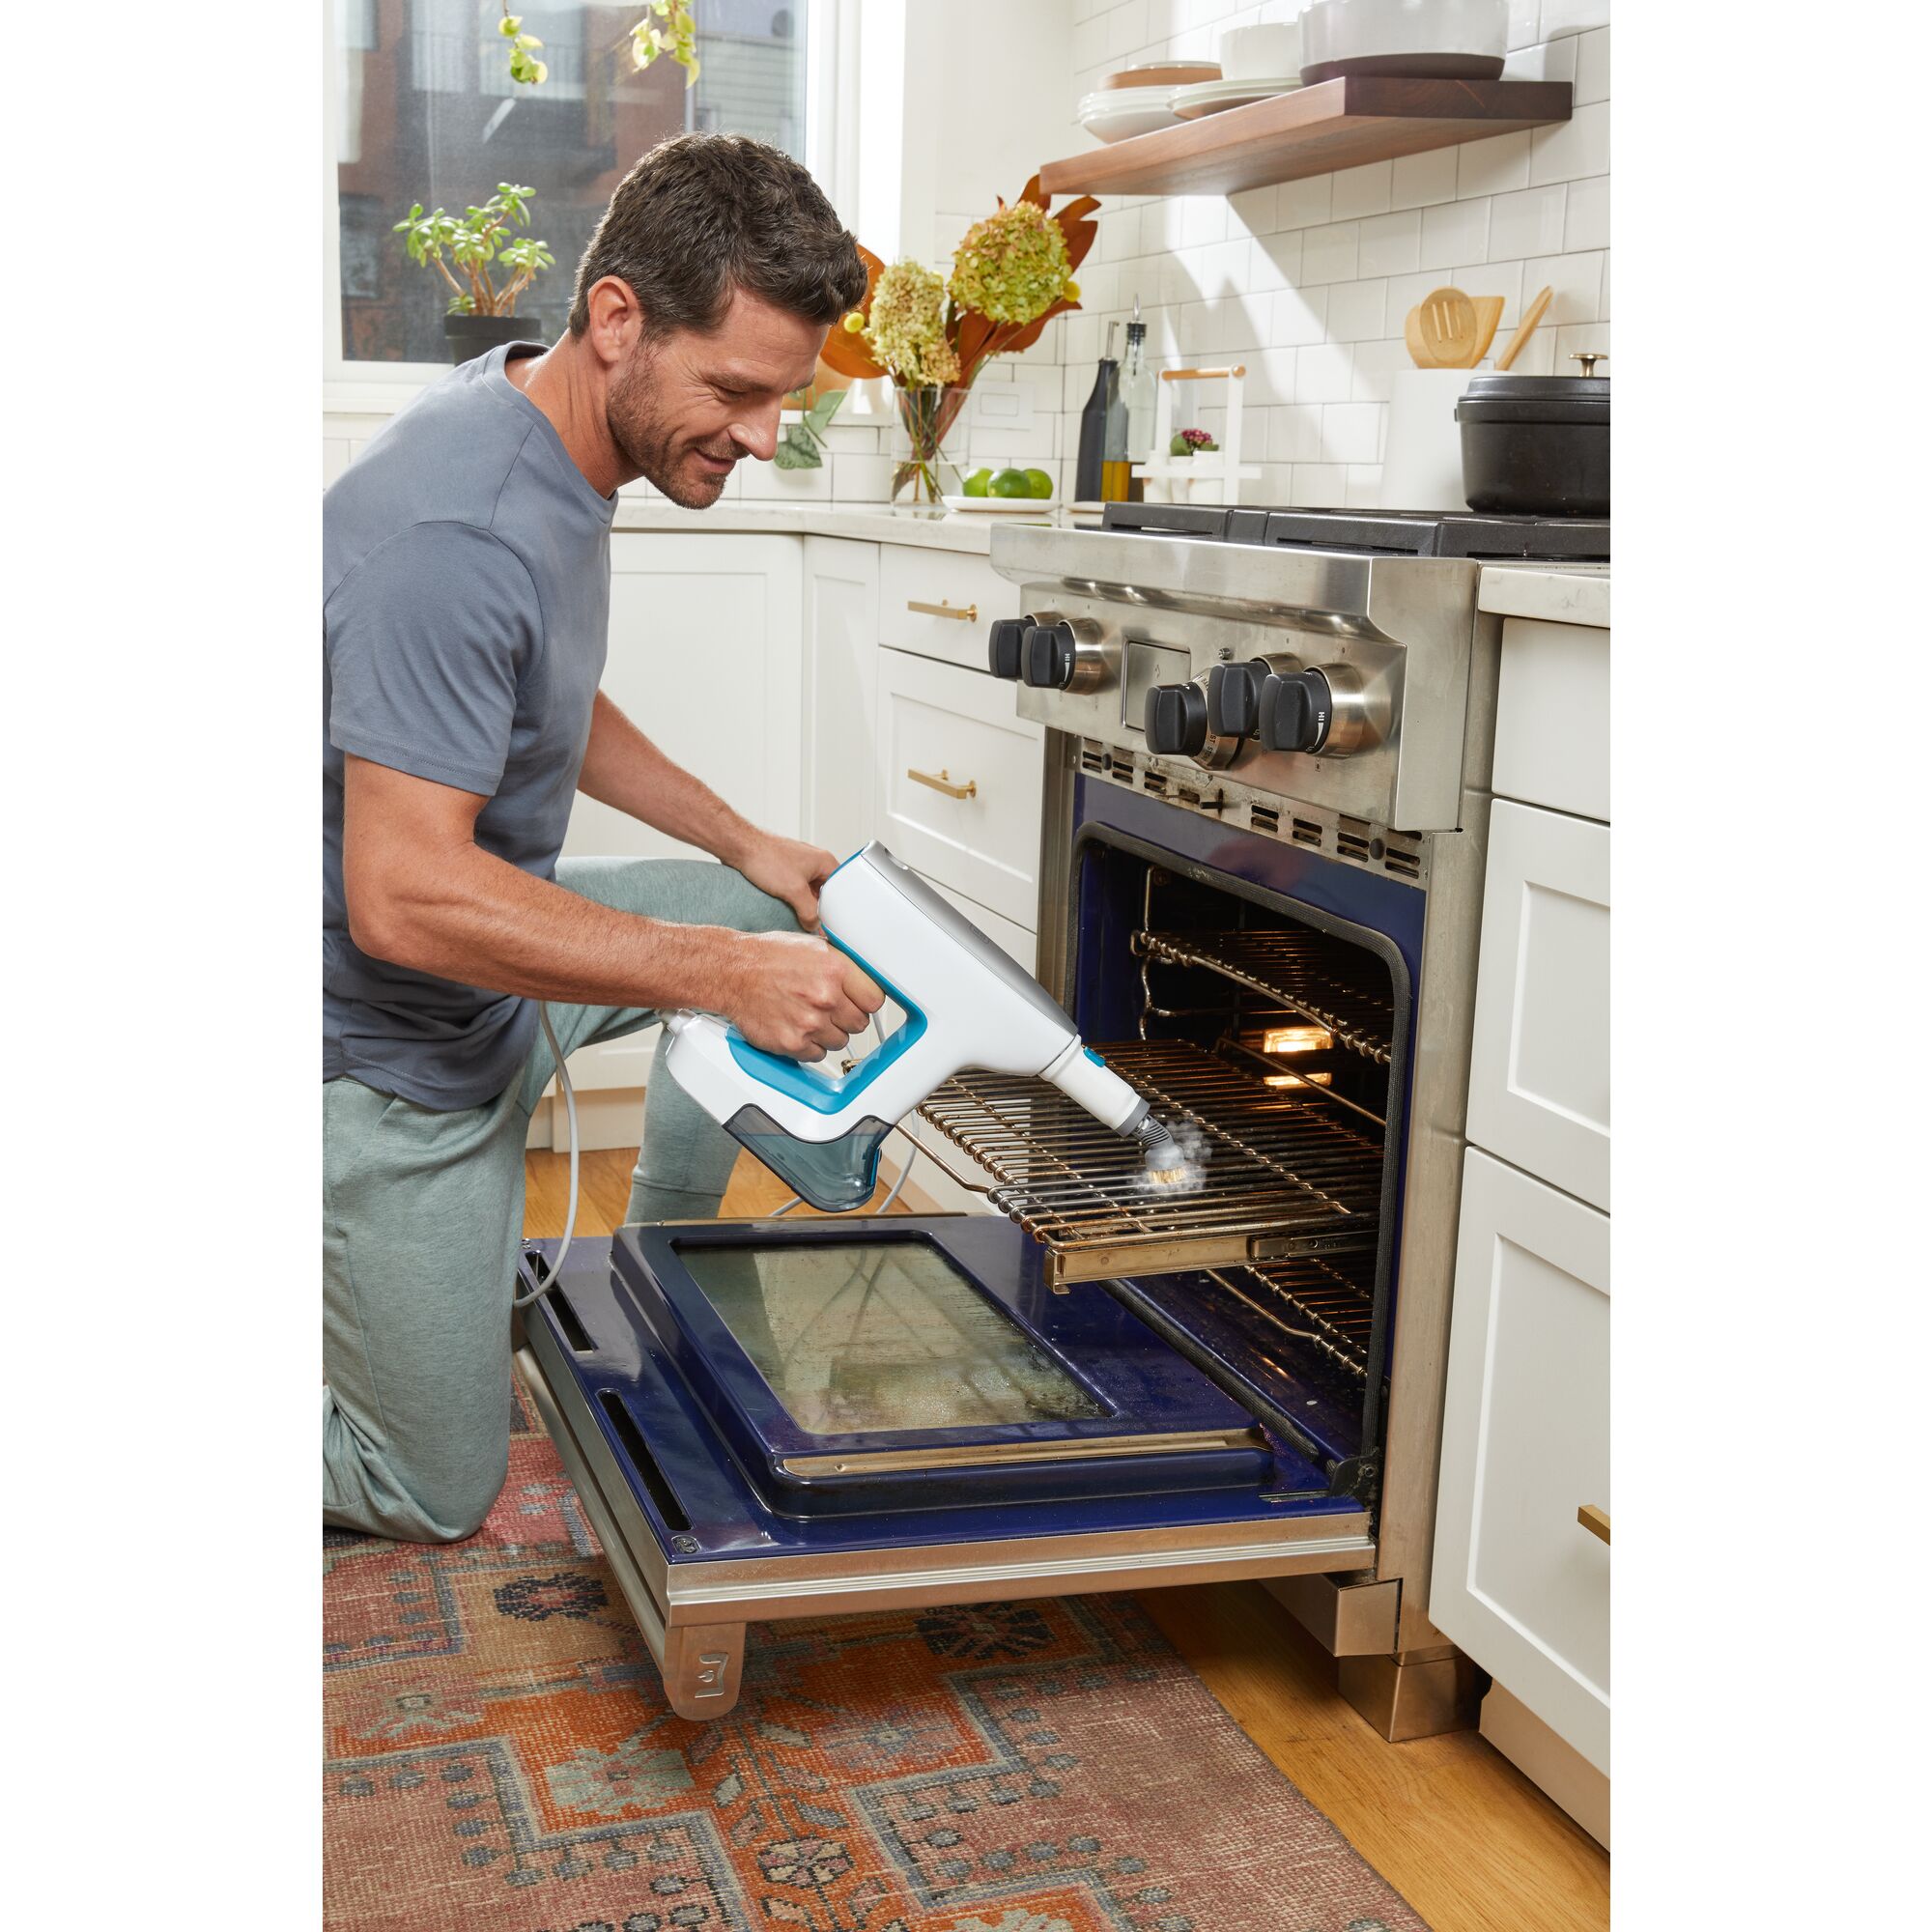 Man cleaning inside an open oven using steam mop accessory